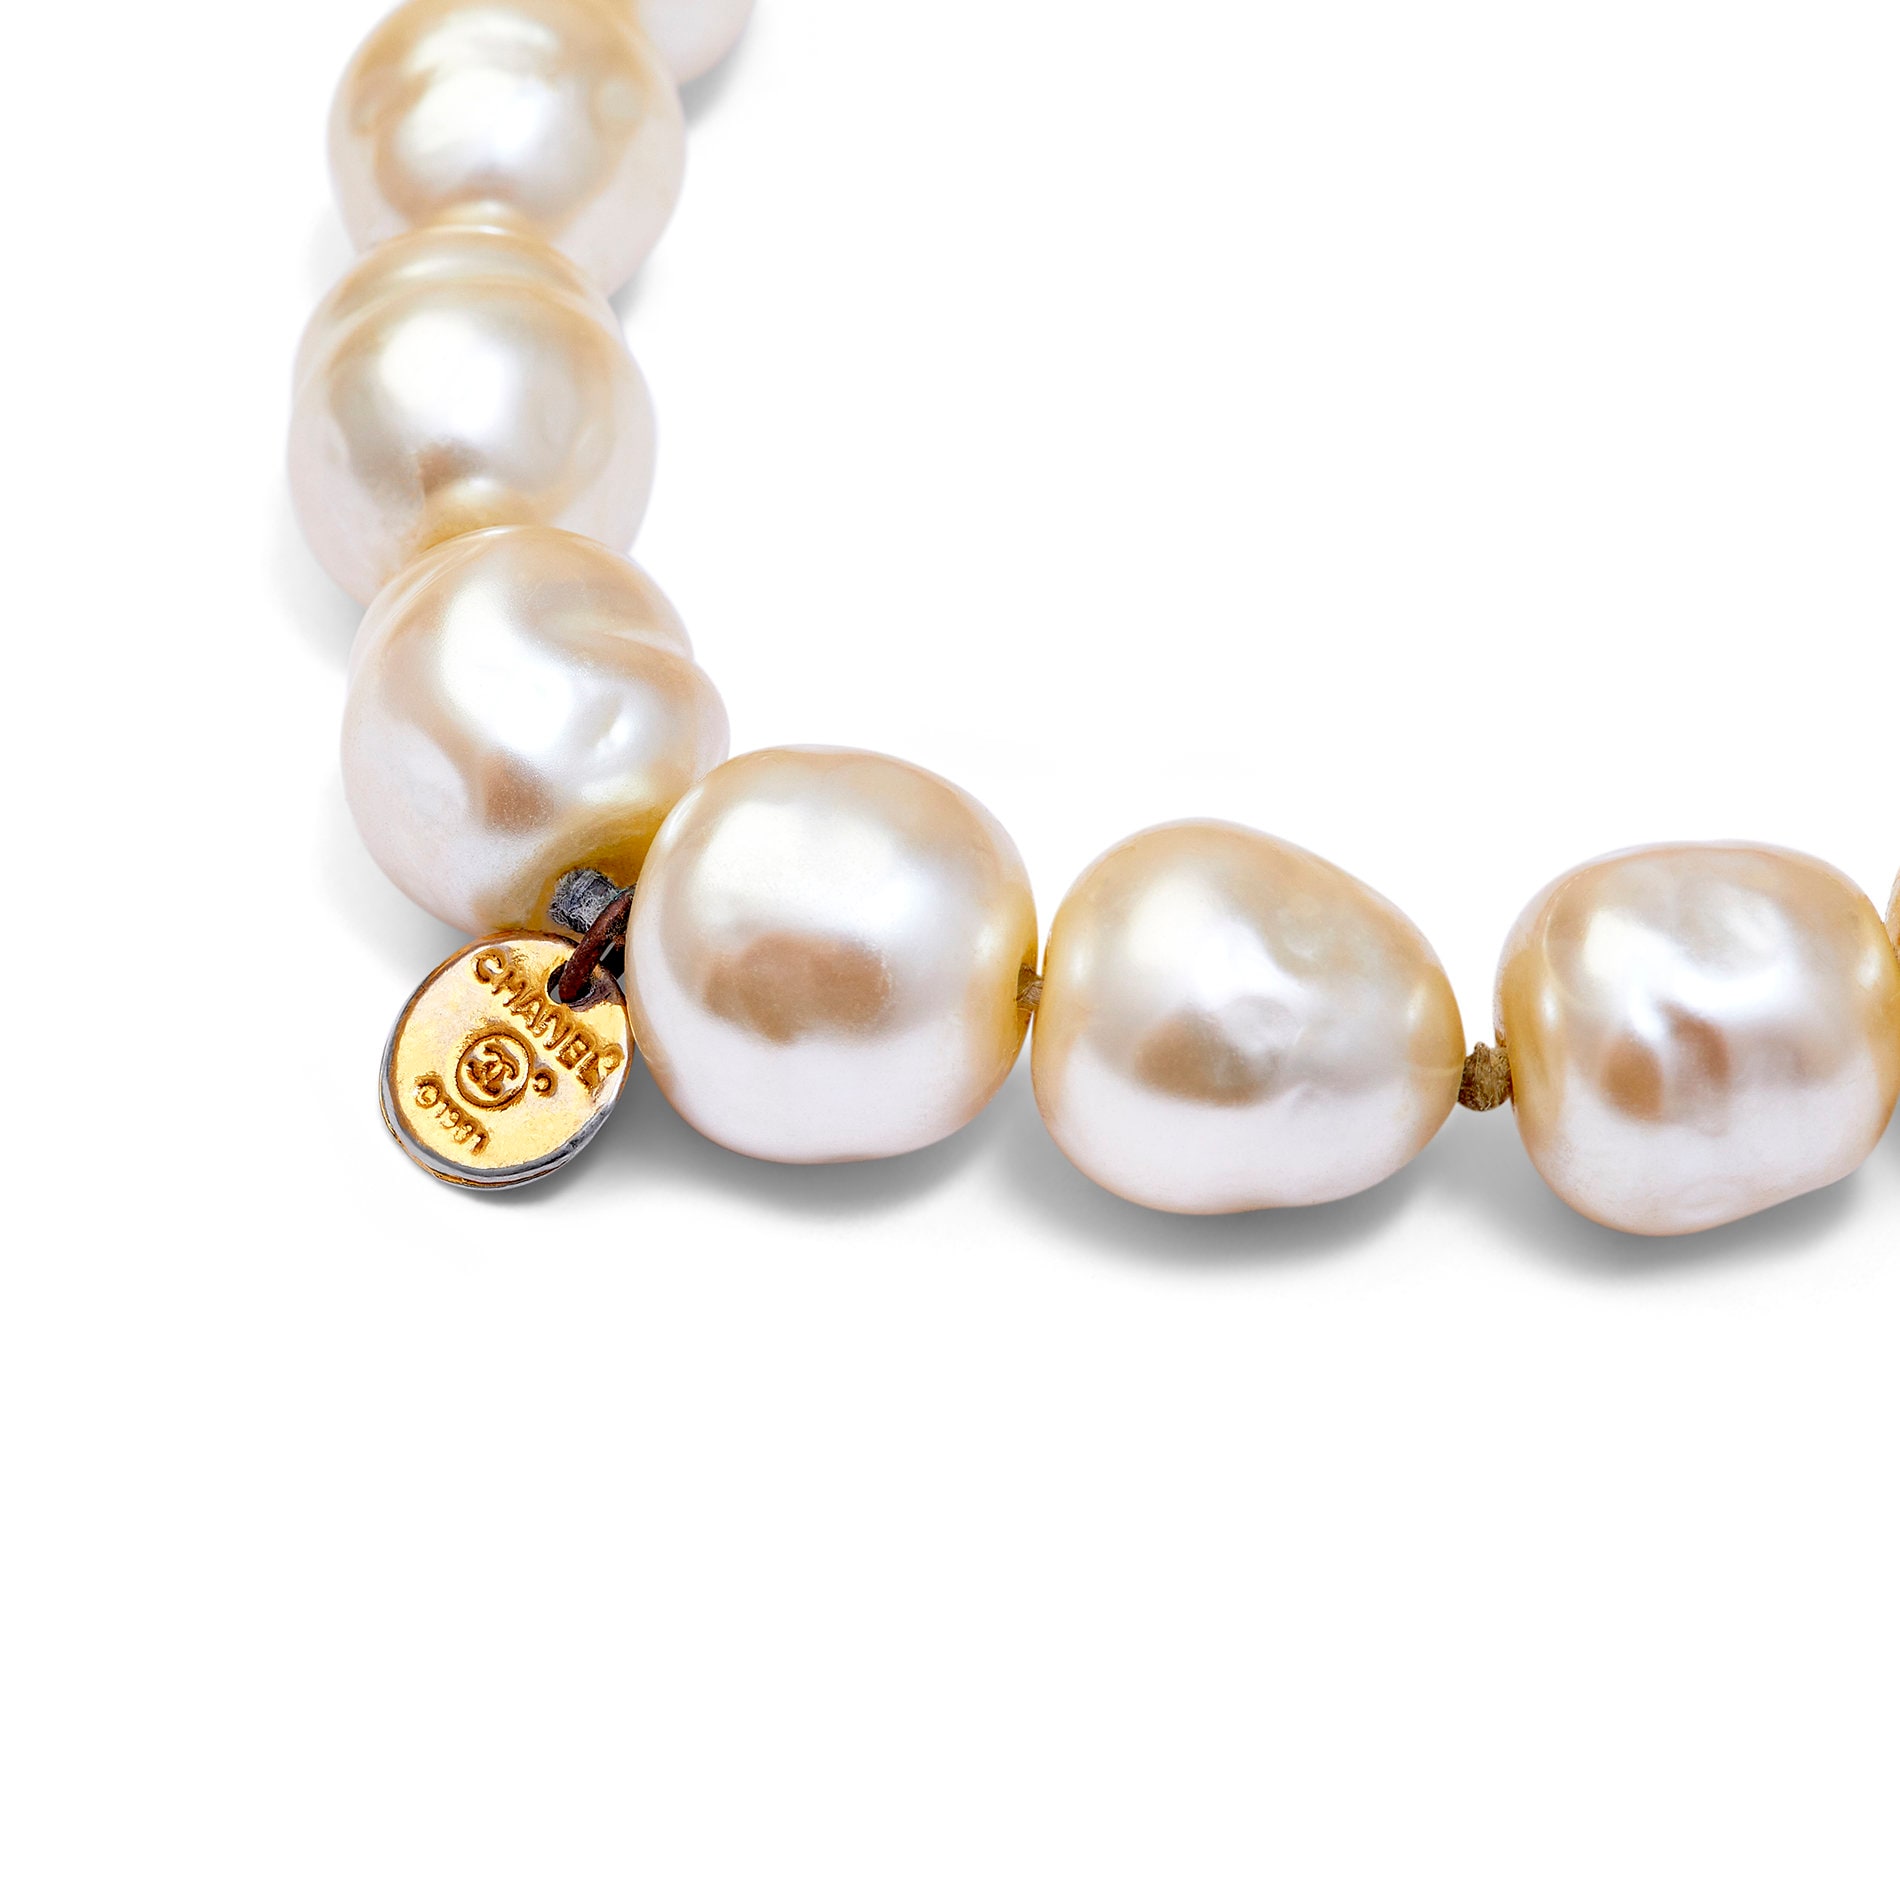 Chanel by Karl Lagerfeld Vintage Large Faux Pearl Necklace, 1993